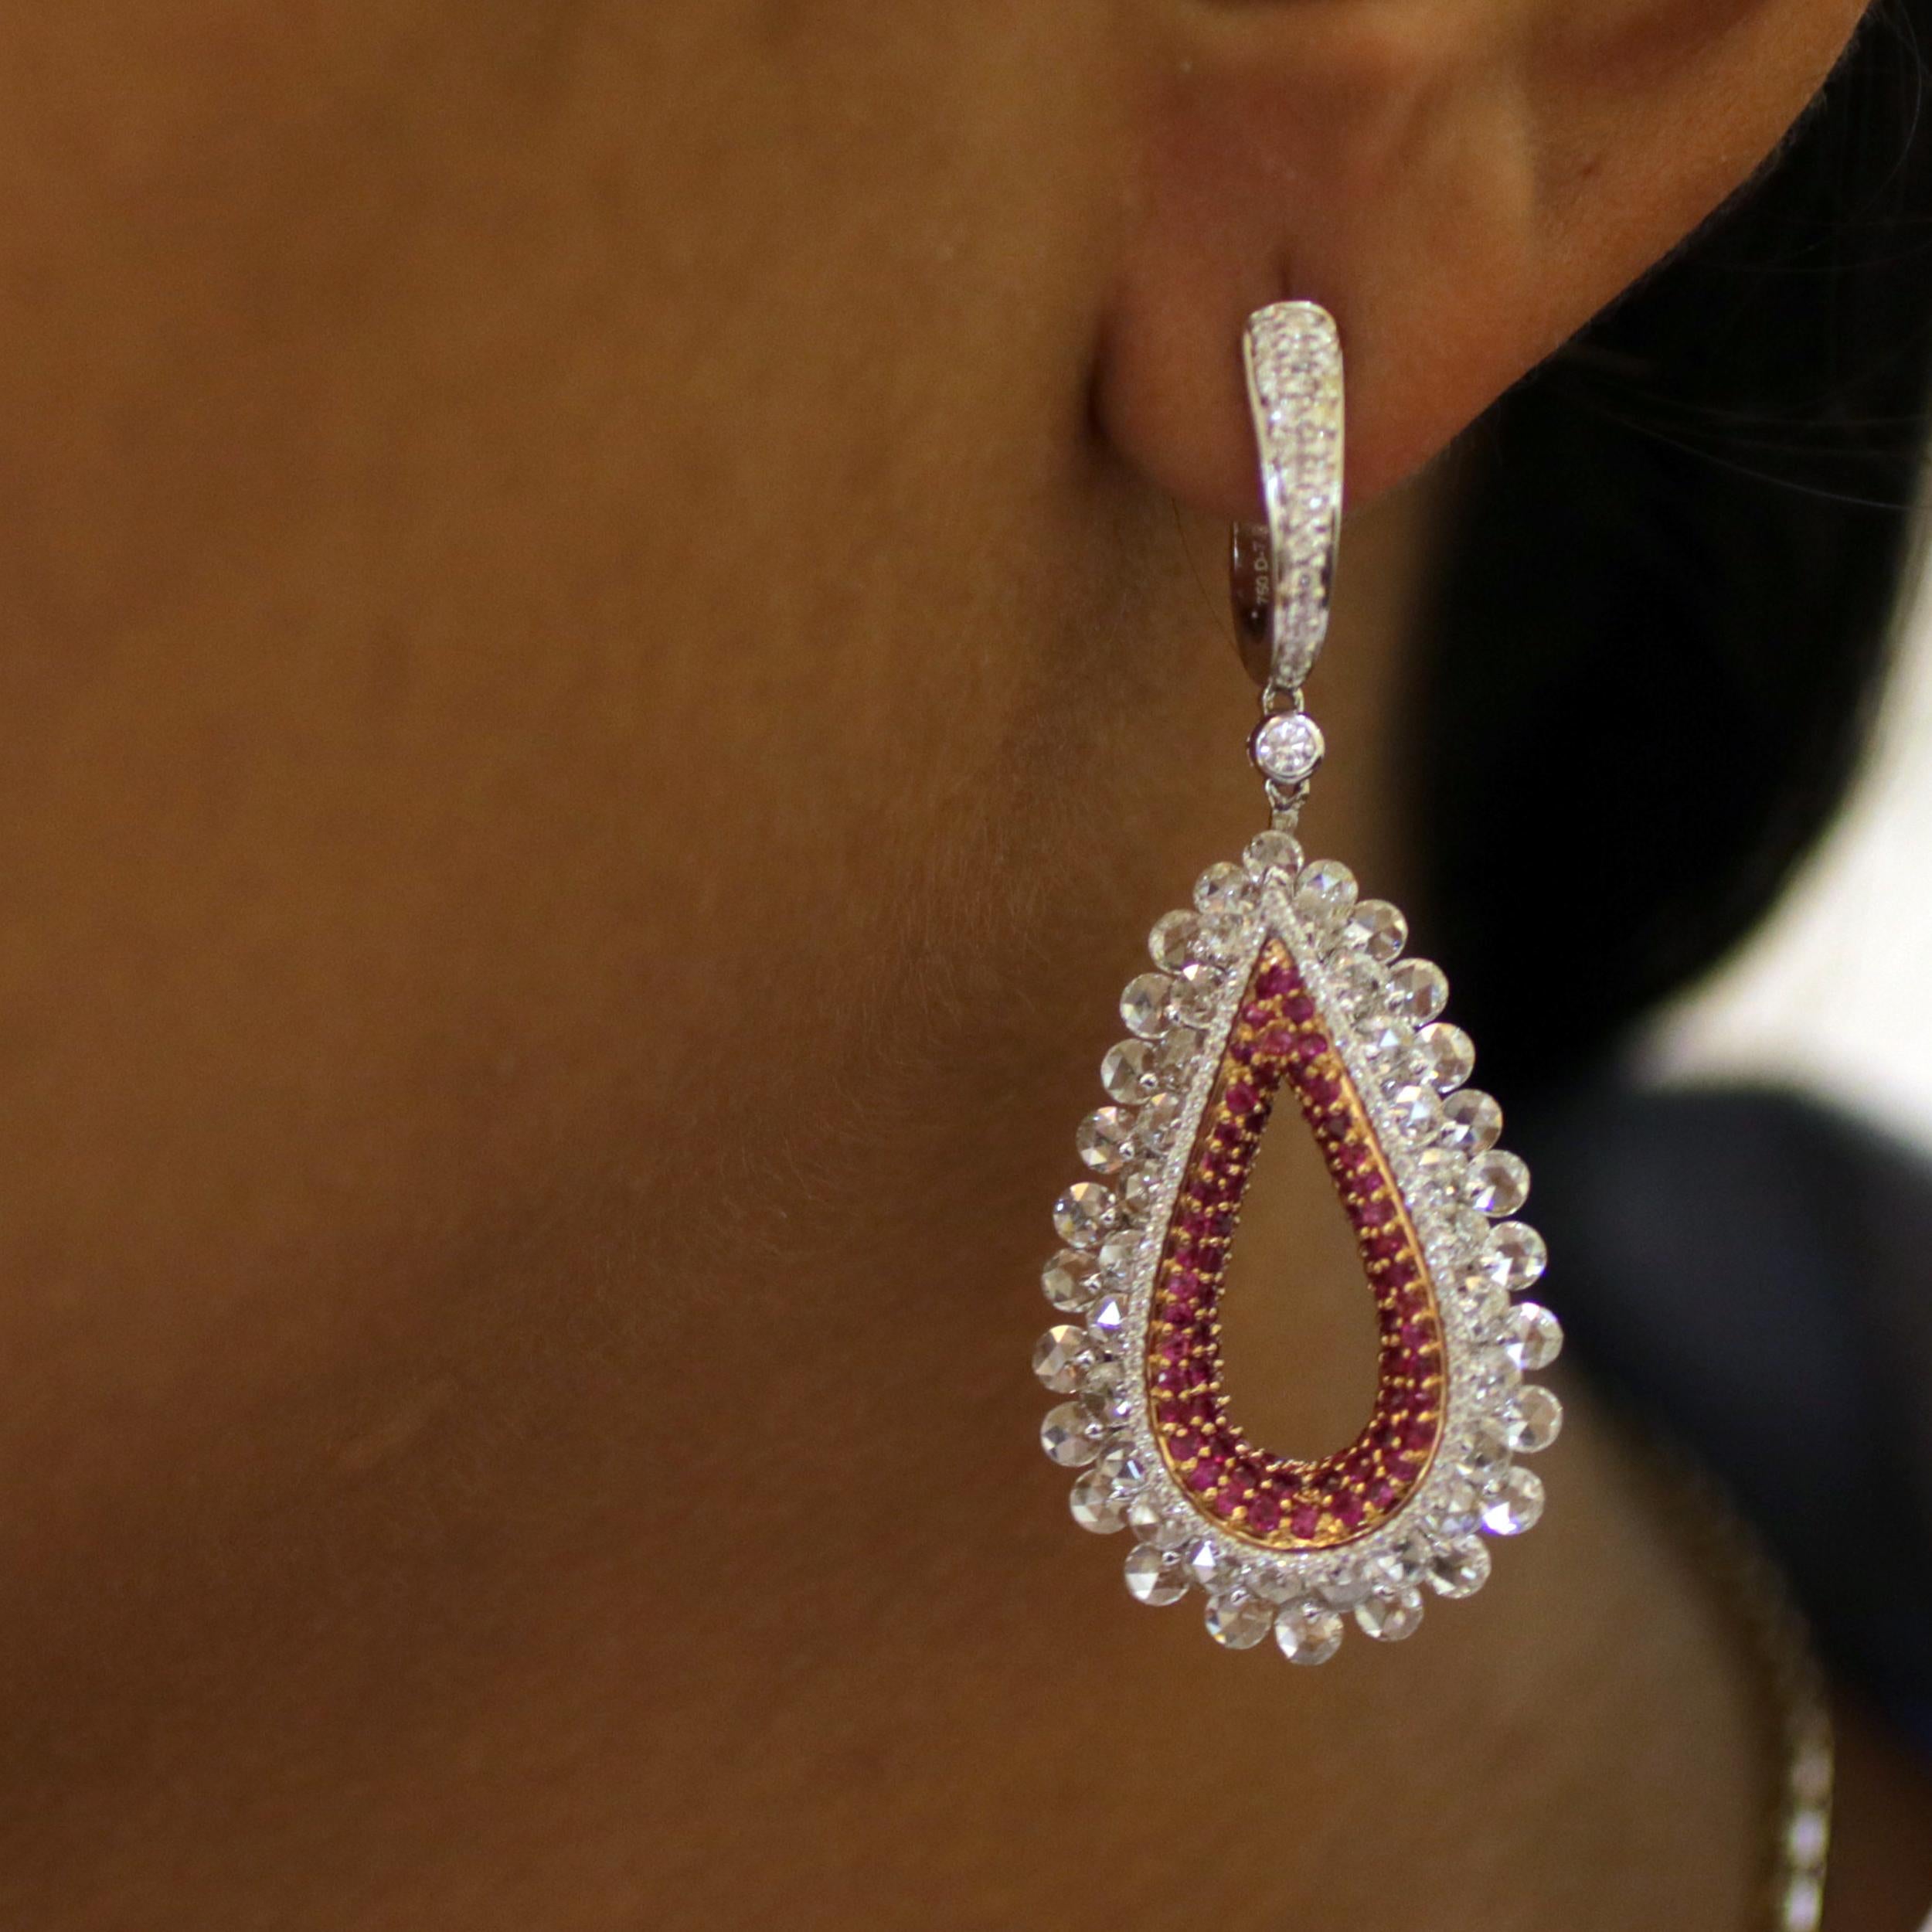 Studio Rêves 18K Rose cut Diamond and Pink Sapphire Tear Drop Dangling Earrings In New Condition For Sale In Mumbai, Maharashtra